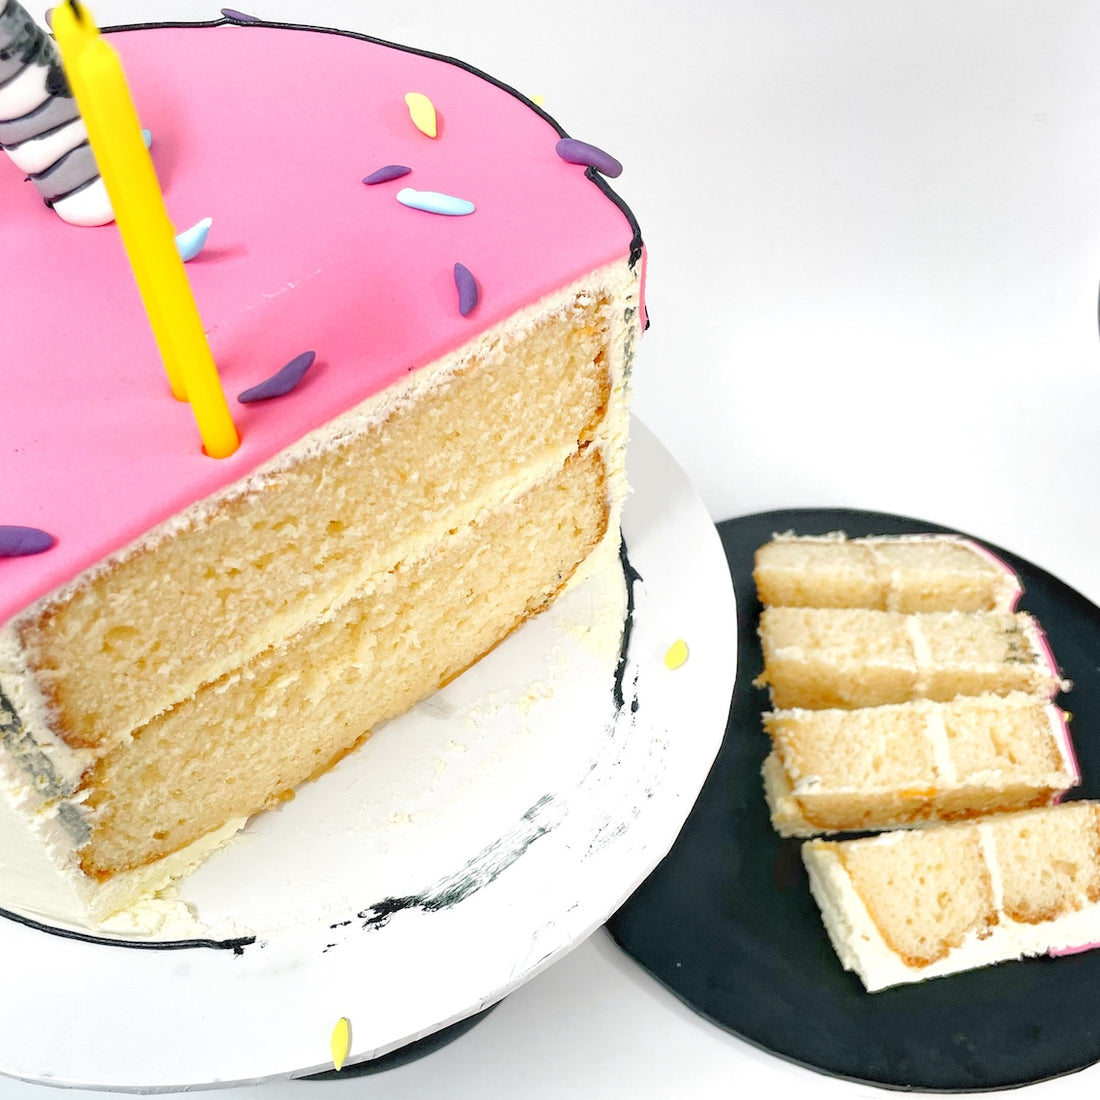 Cutting round cake properly, easy cake cutting, how to cut a cake